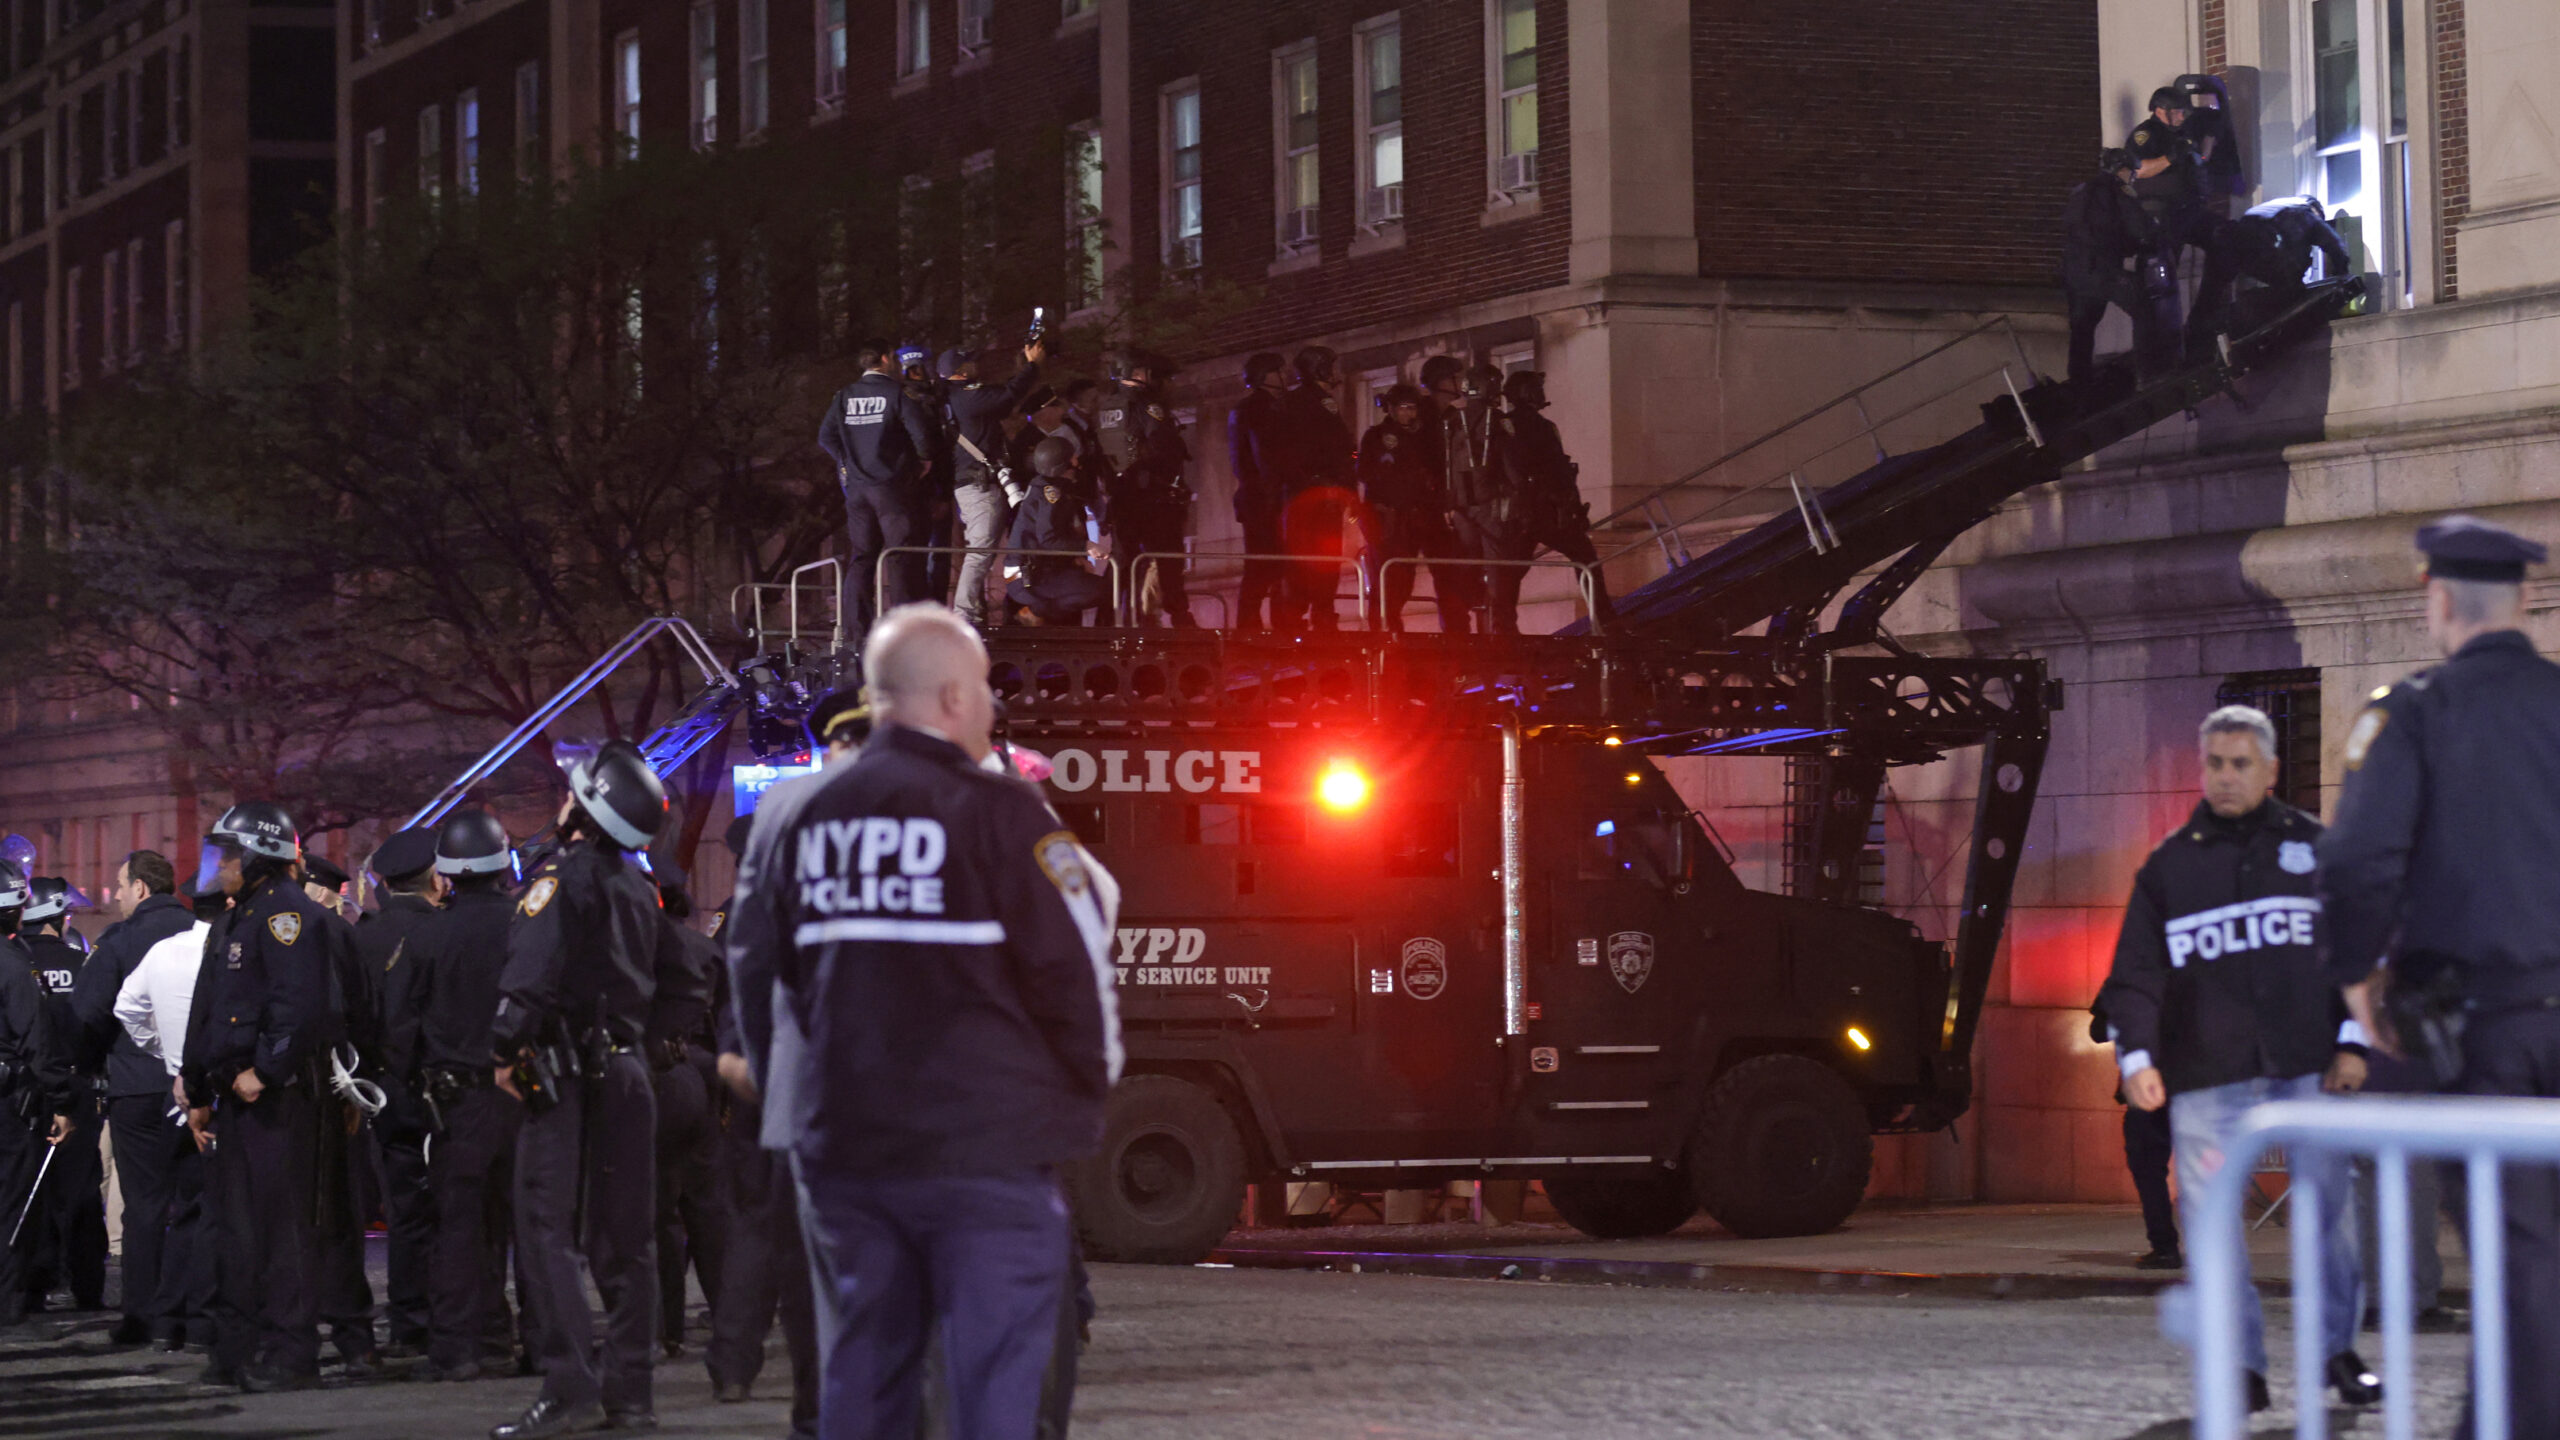 NYPD enters Hamilton Hall at Columbia University during unauthorized occupation by pro-Hamas protesters